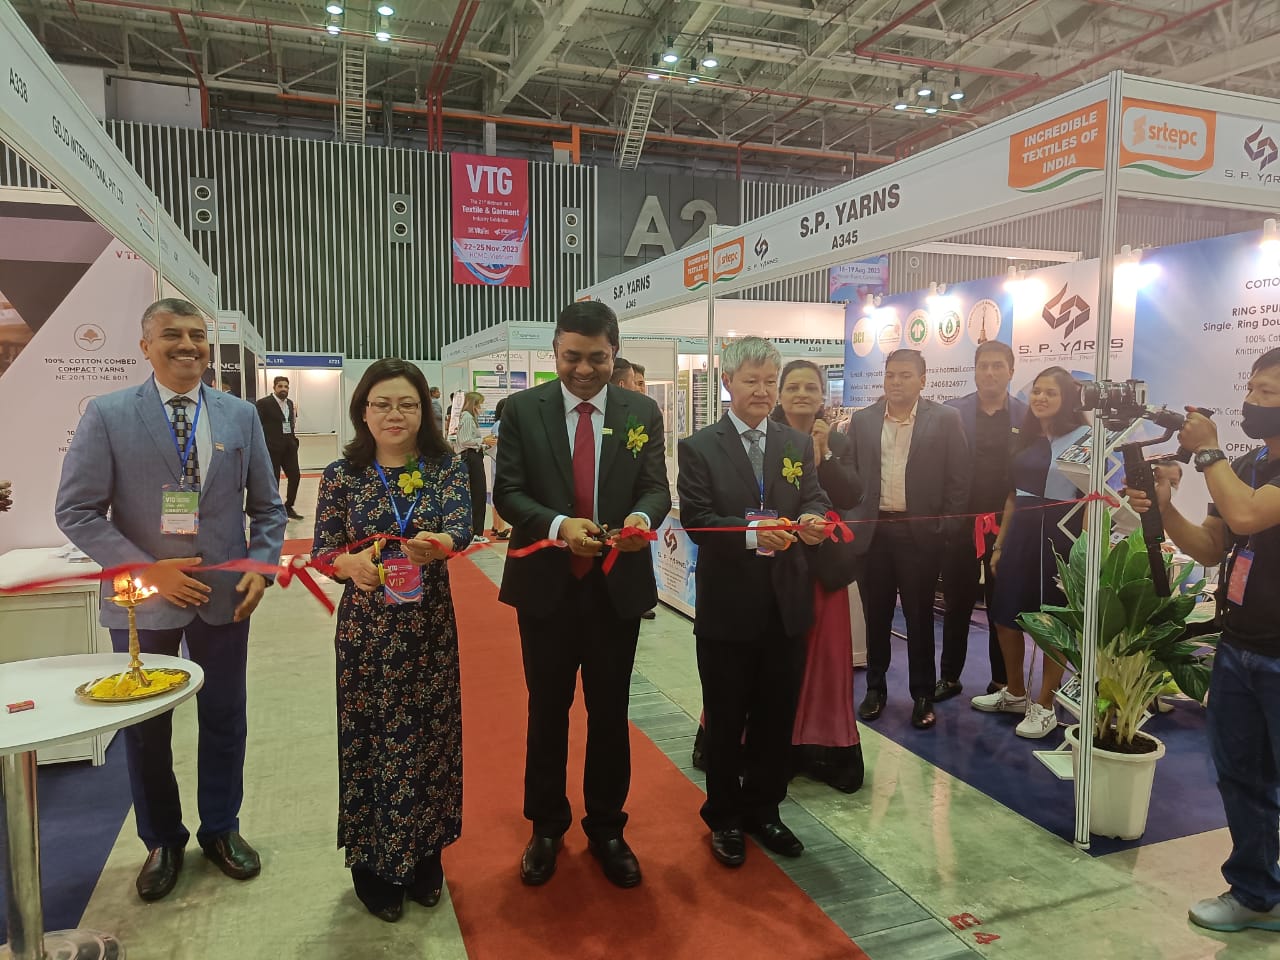 HE Dr Madan Mohan Sethi, Consul General of India inaugurating the India pavilion organised by TEXPROCIL at the Vietnam Textiles and Garment exhibition held at Ho Chi Minh City.